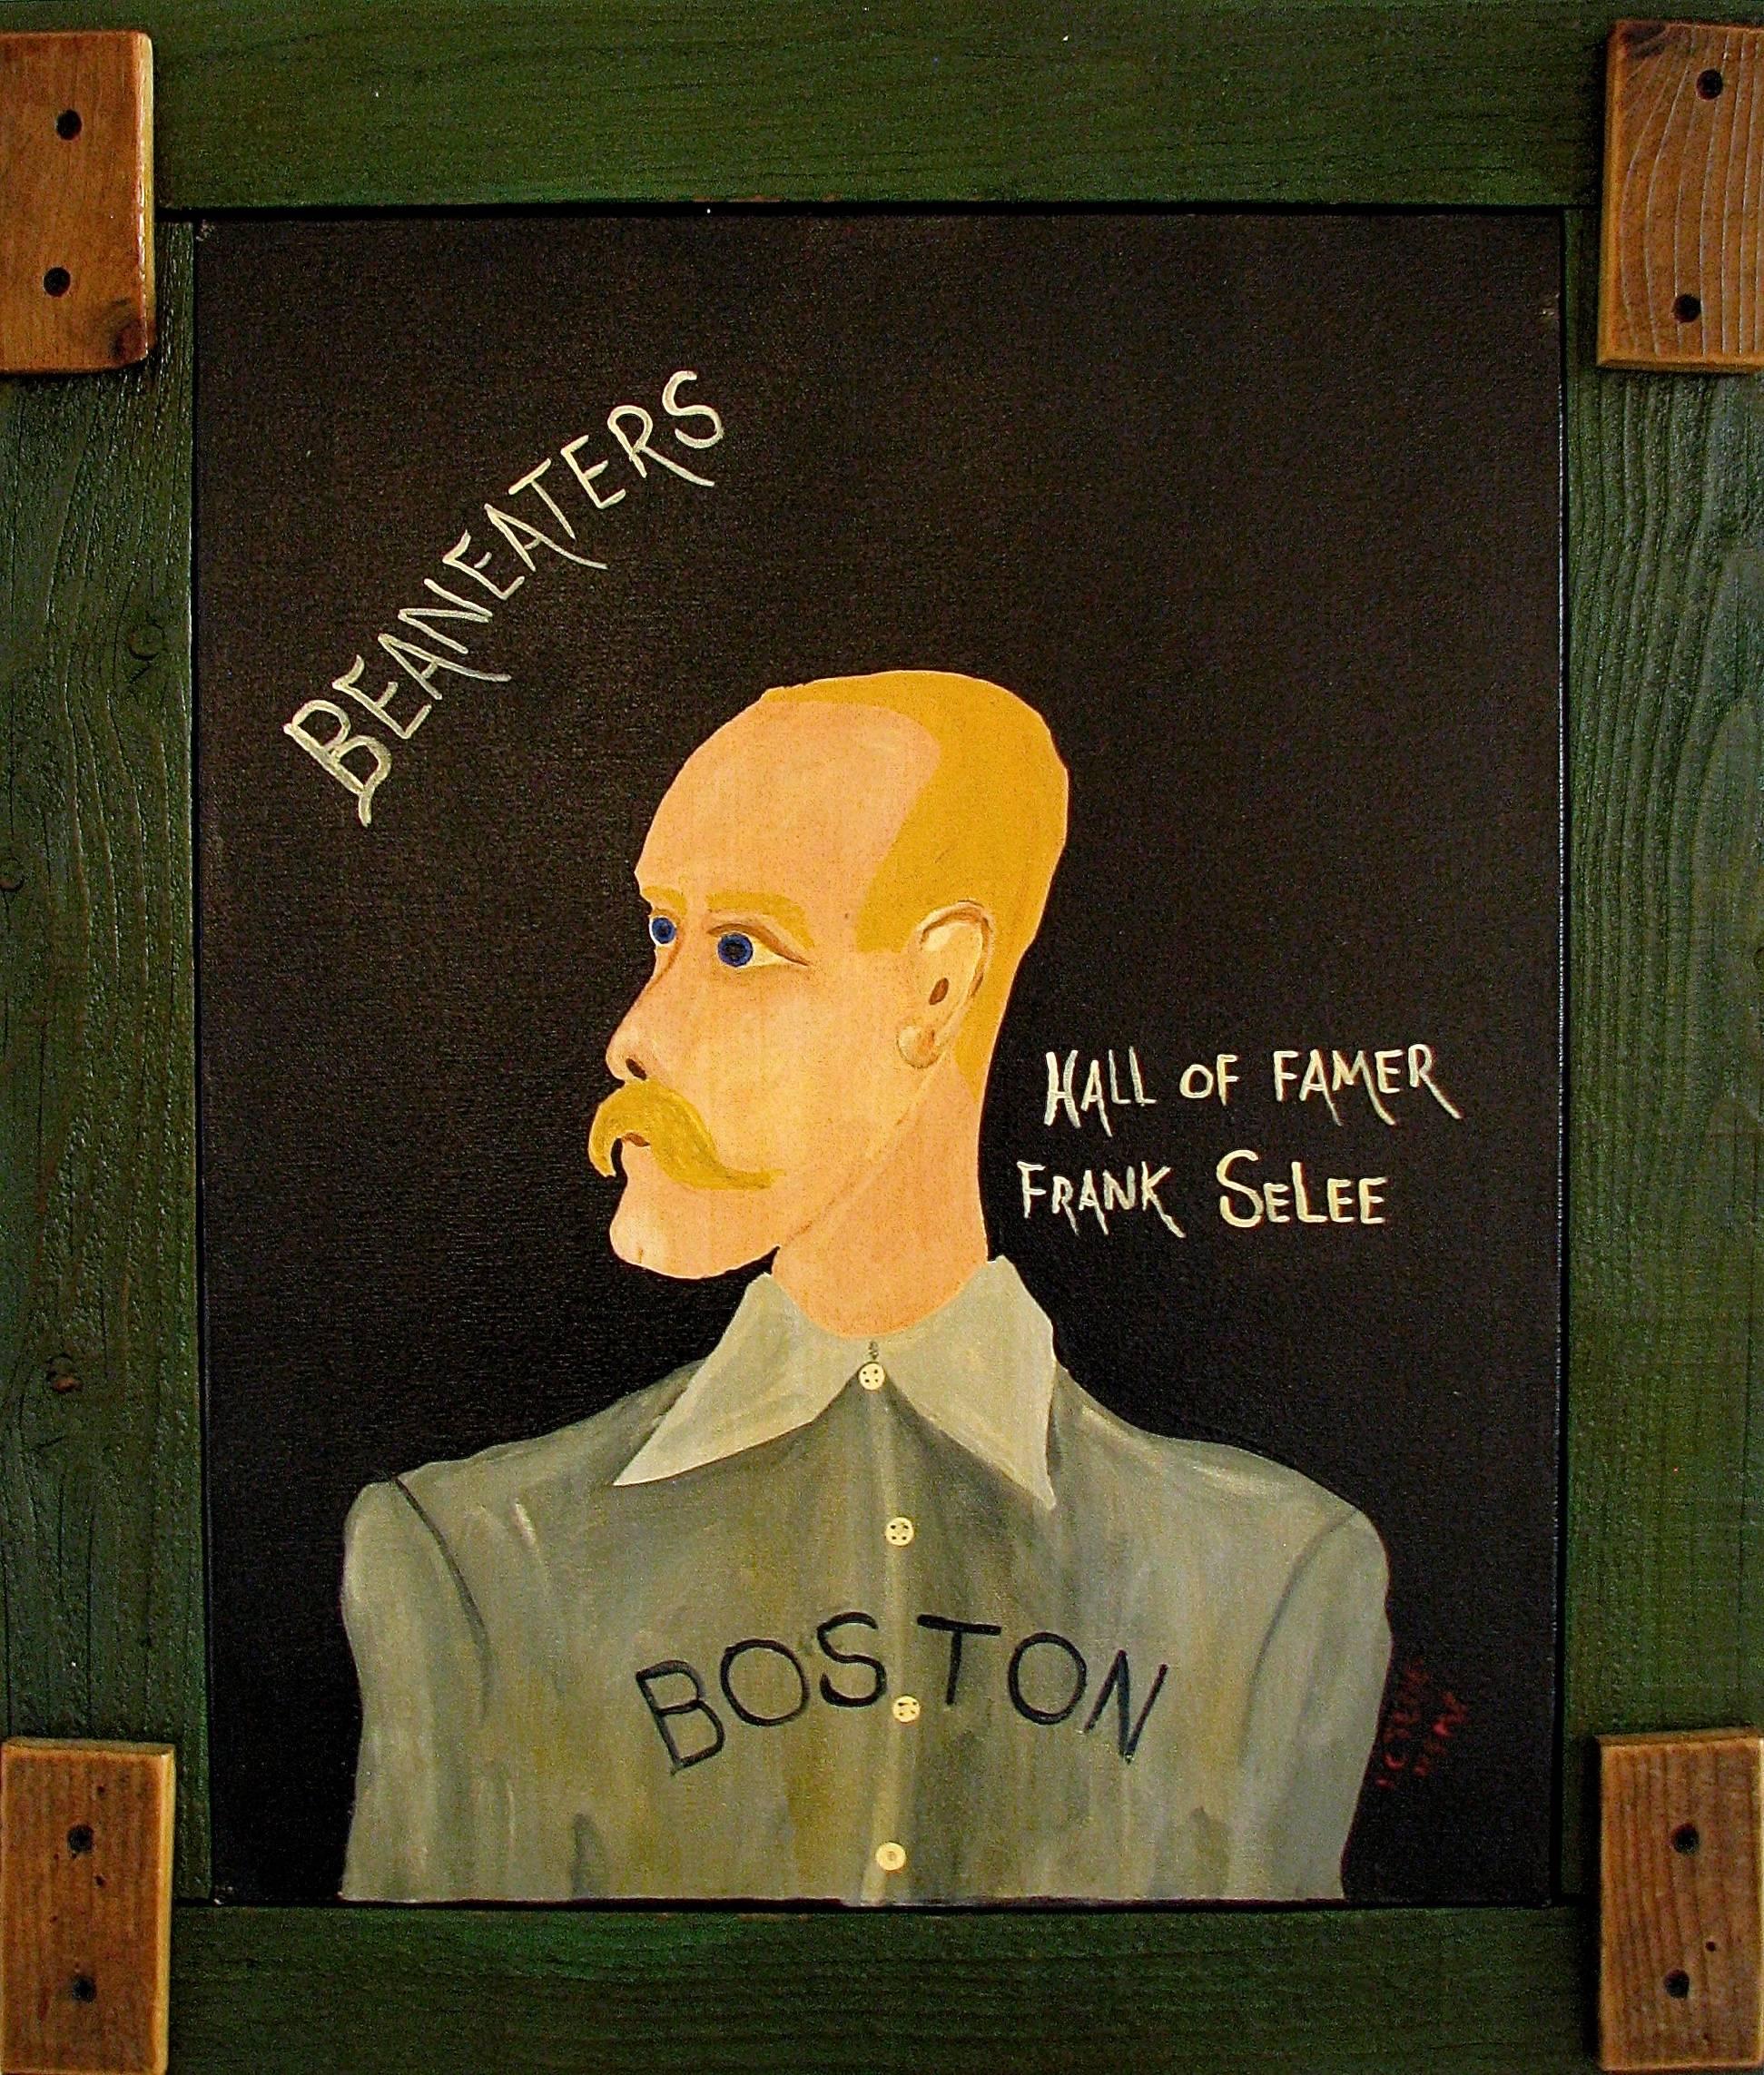 Elias Telles Portrait Painting - Beaneaters, Hall of Famer Frank Selee